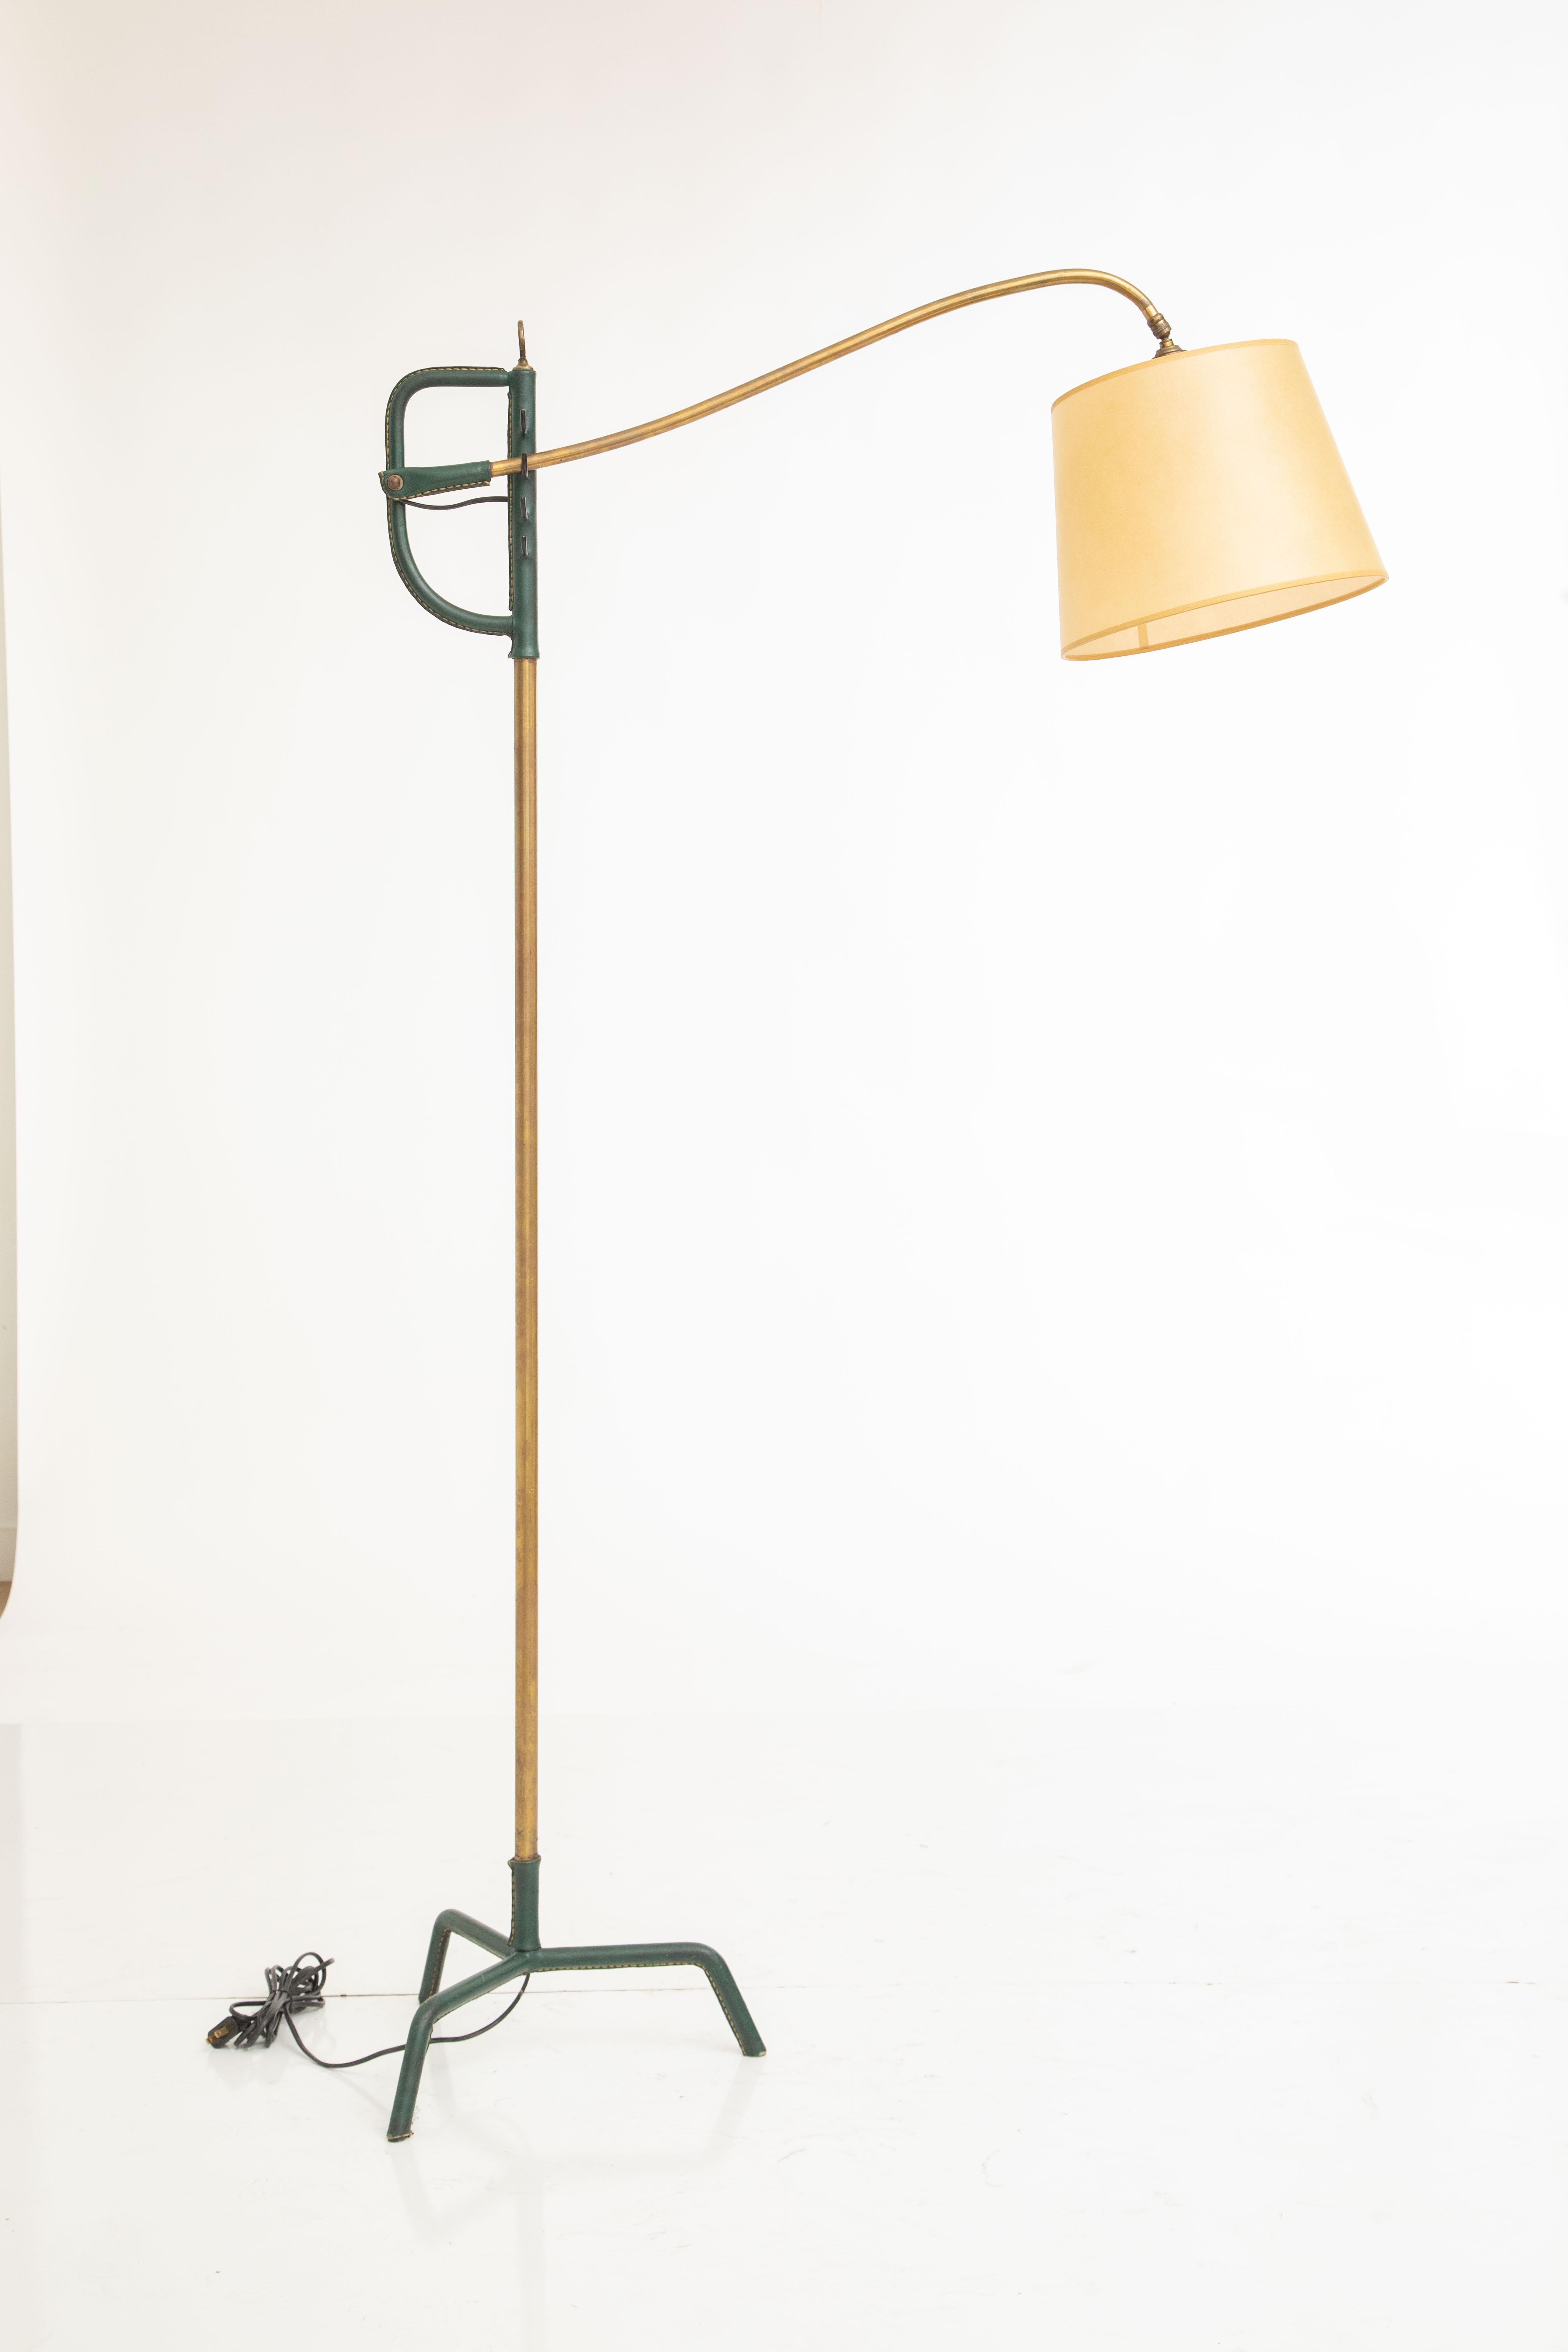 Hunter green stitched leather and brass floor lamp by Jacques Adnet
Cantilever design allows four adjustable height positions
Saddle stitched leather tripod base and top stem
Newly rewired to American standard, new silk shade.
Impeccable collector